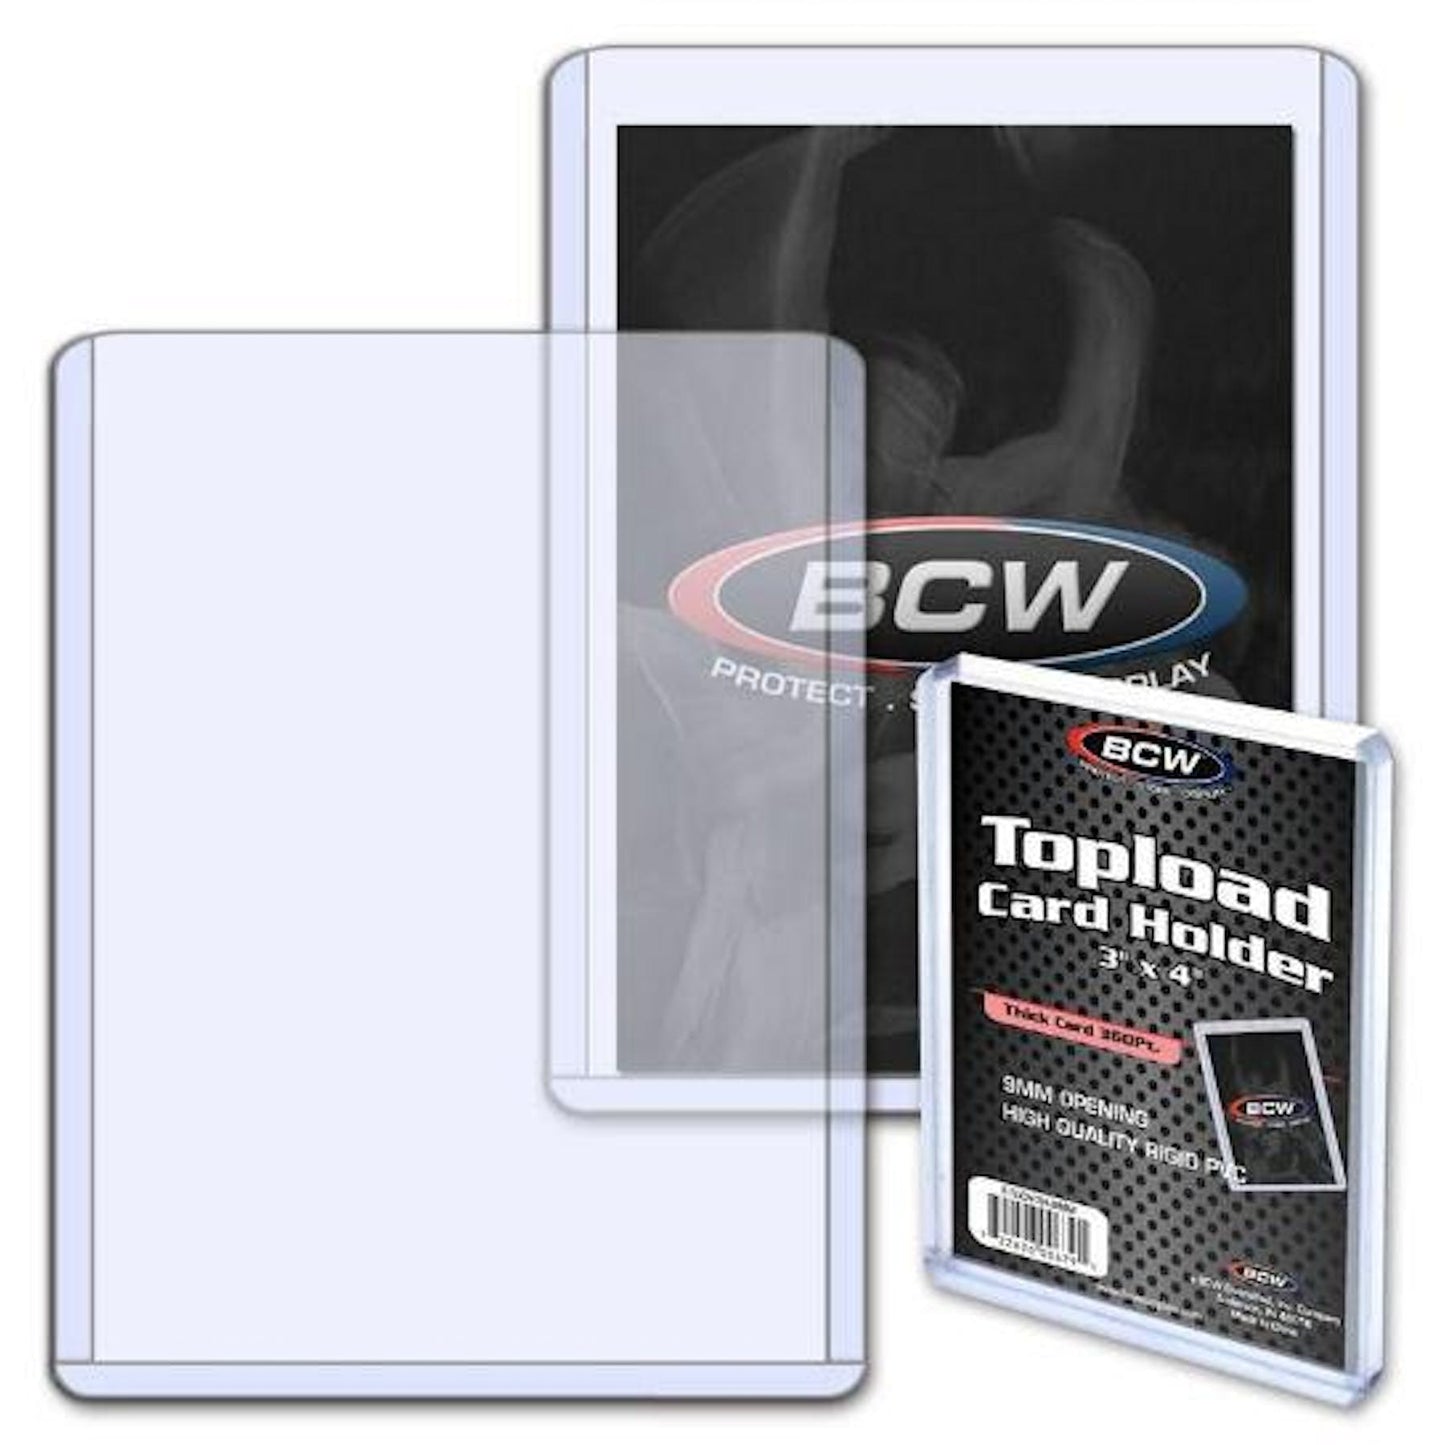 BCW - Topload Card Holders - 3x4 - Thick Card 360 Pt.